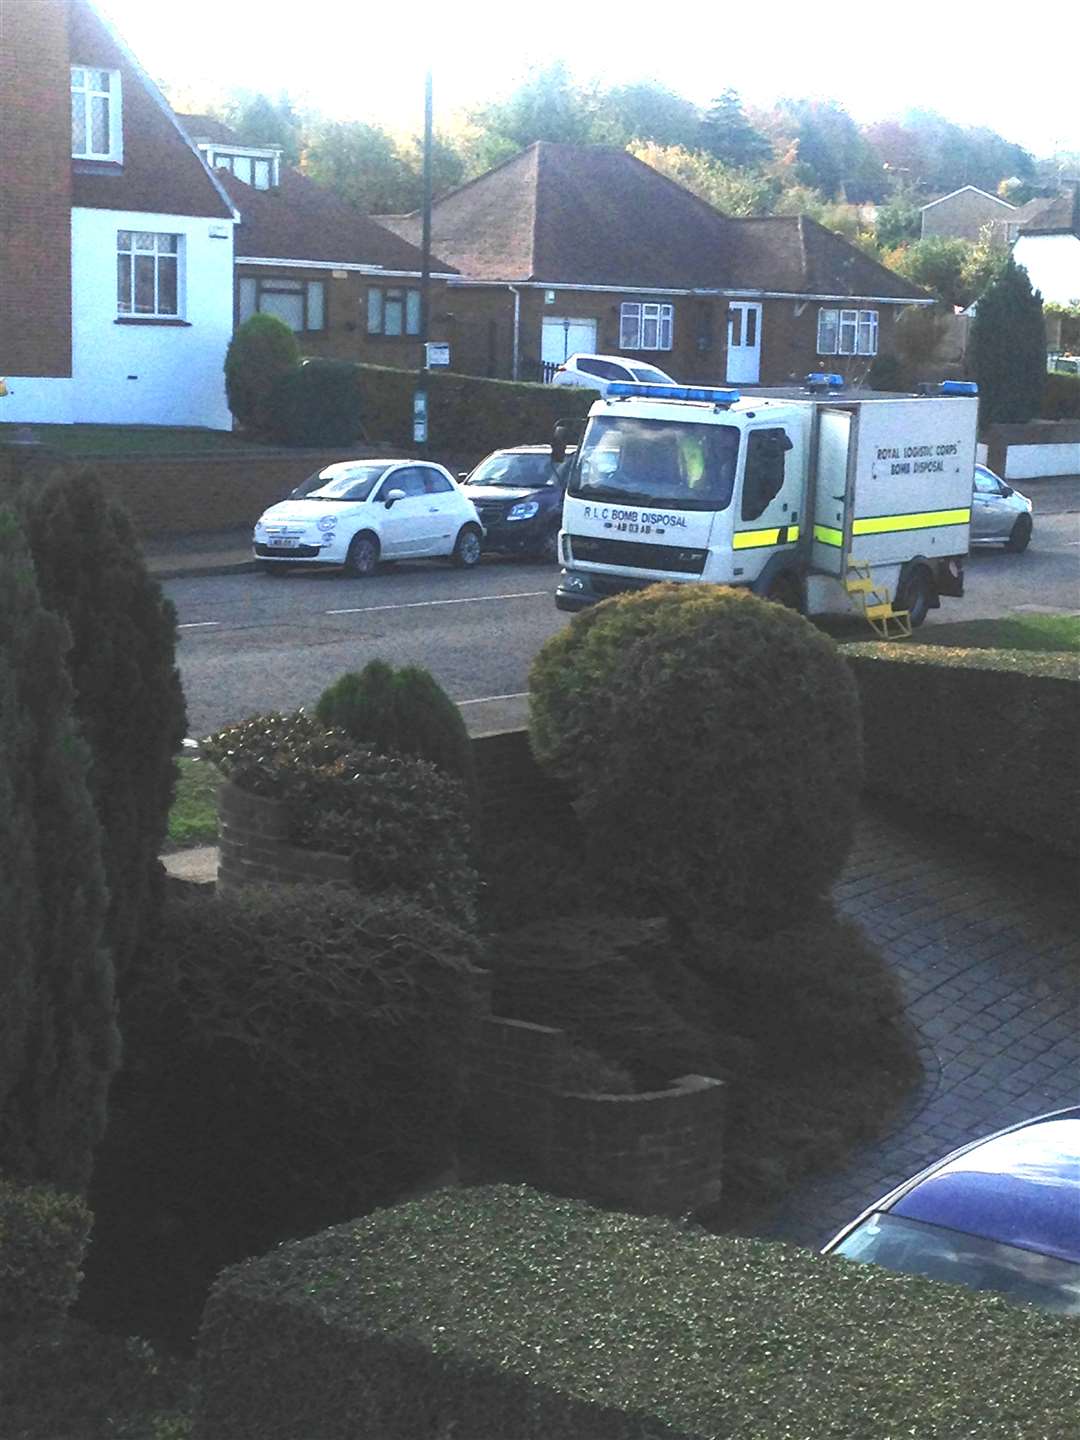 A bomb disposal vehicle at the scene in Strood